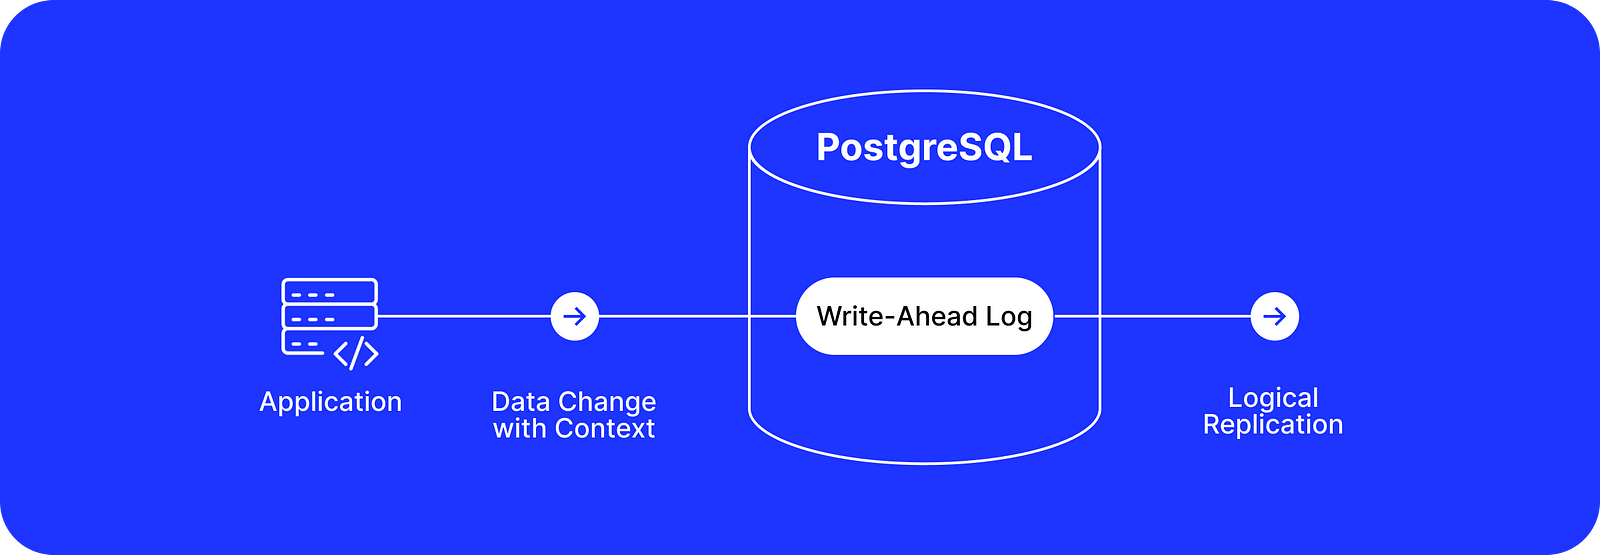 The Ultimate Guide to PostgreSQL Data Change Tracking